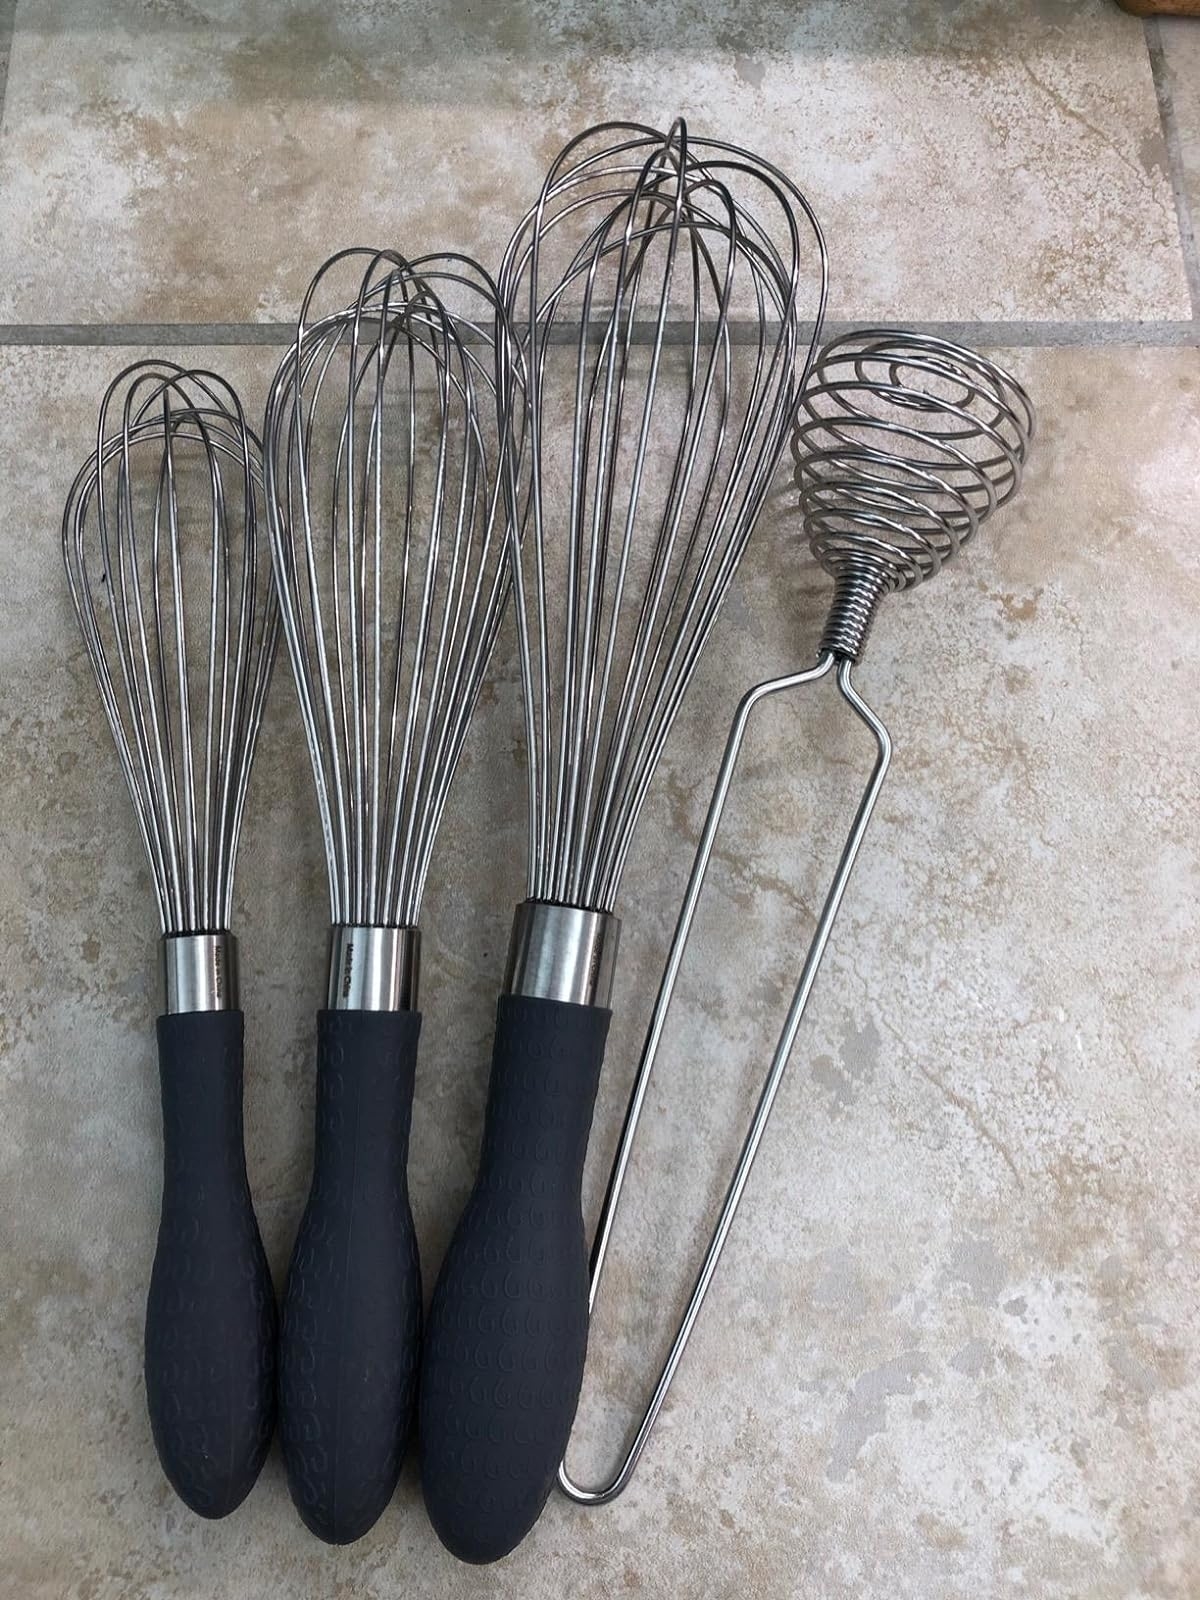 Reviewer image of the three whisks and a metal whisk